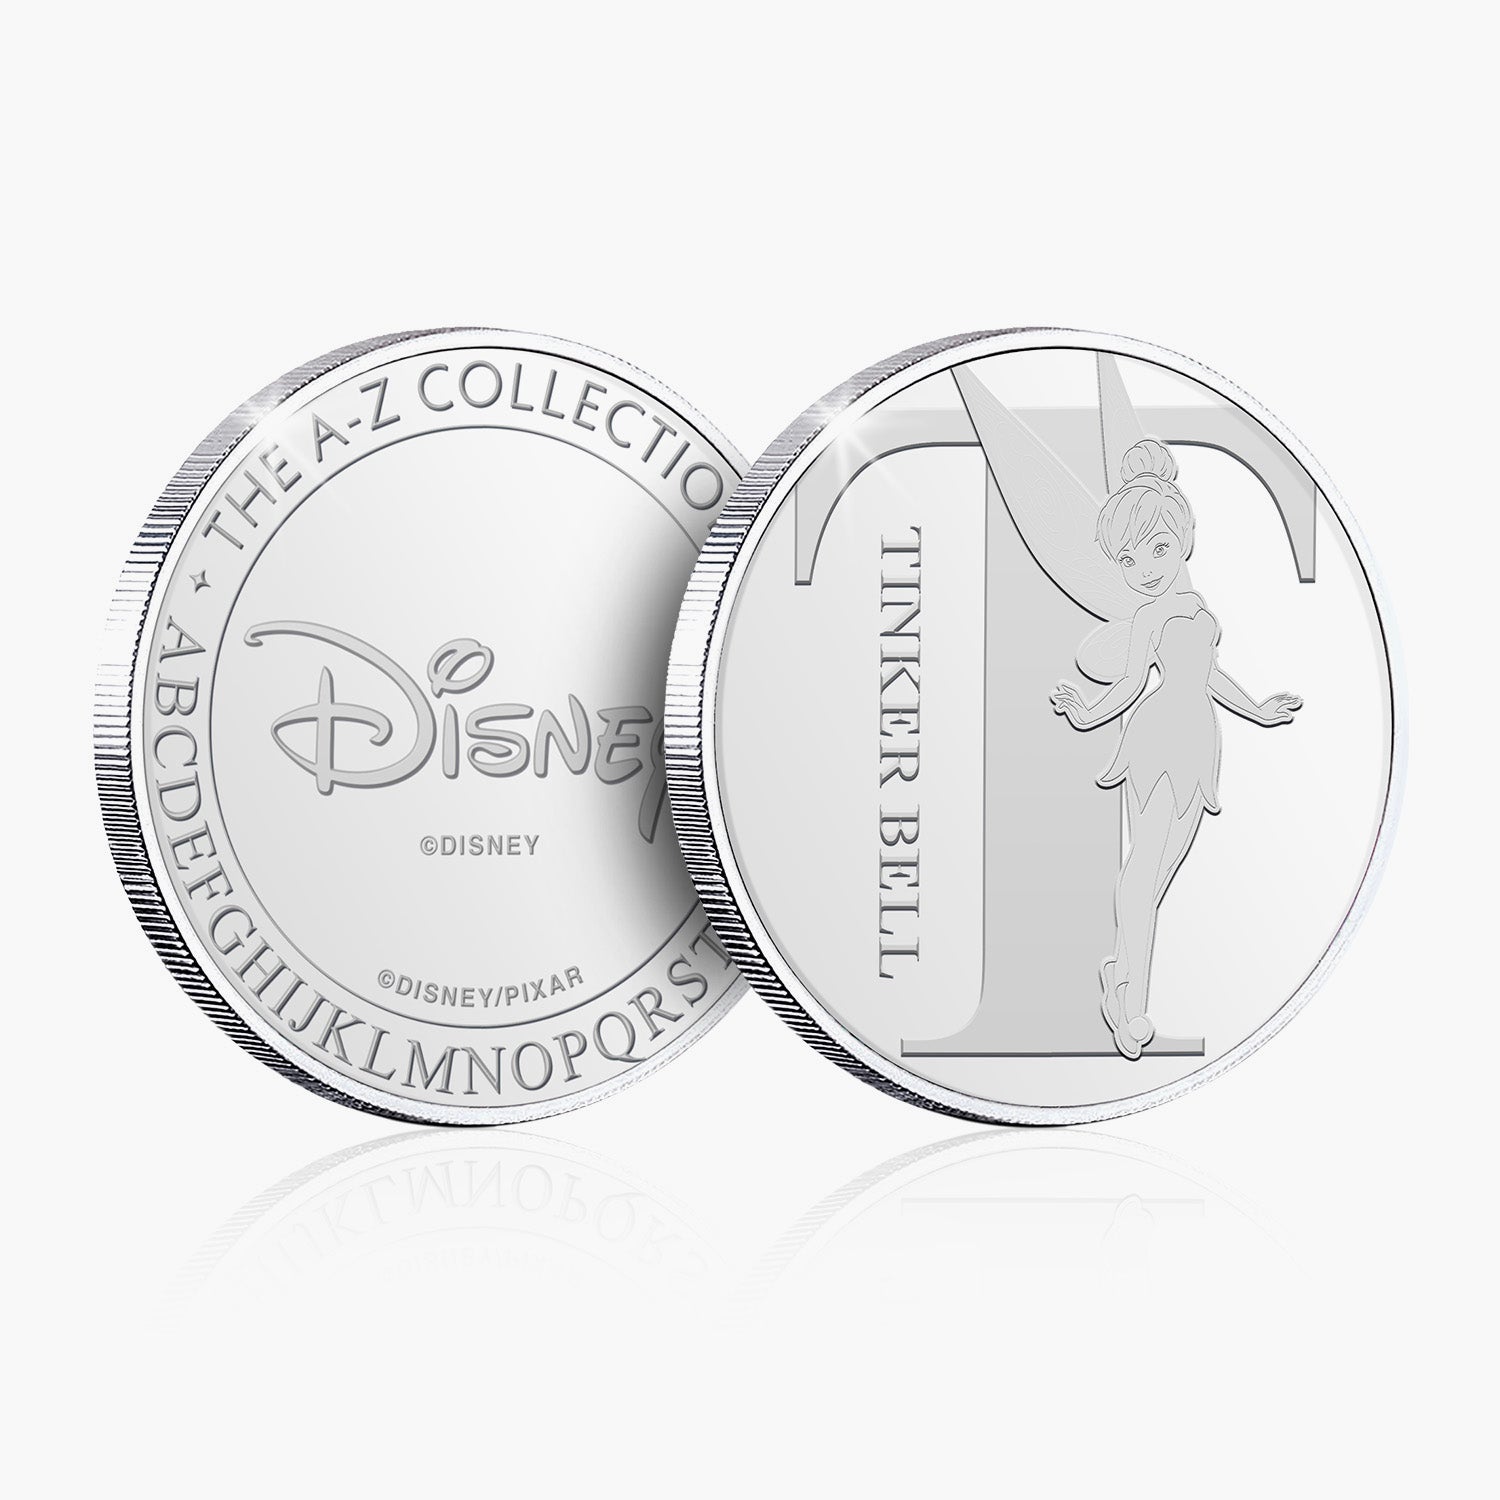 T Is For Tinkerbell Silver-Plated Commemorative